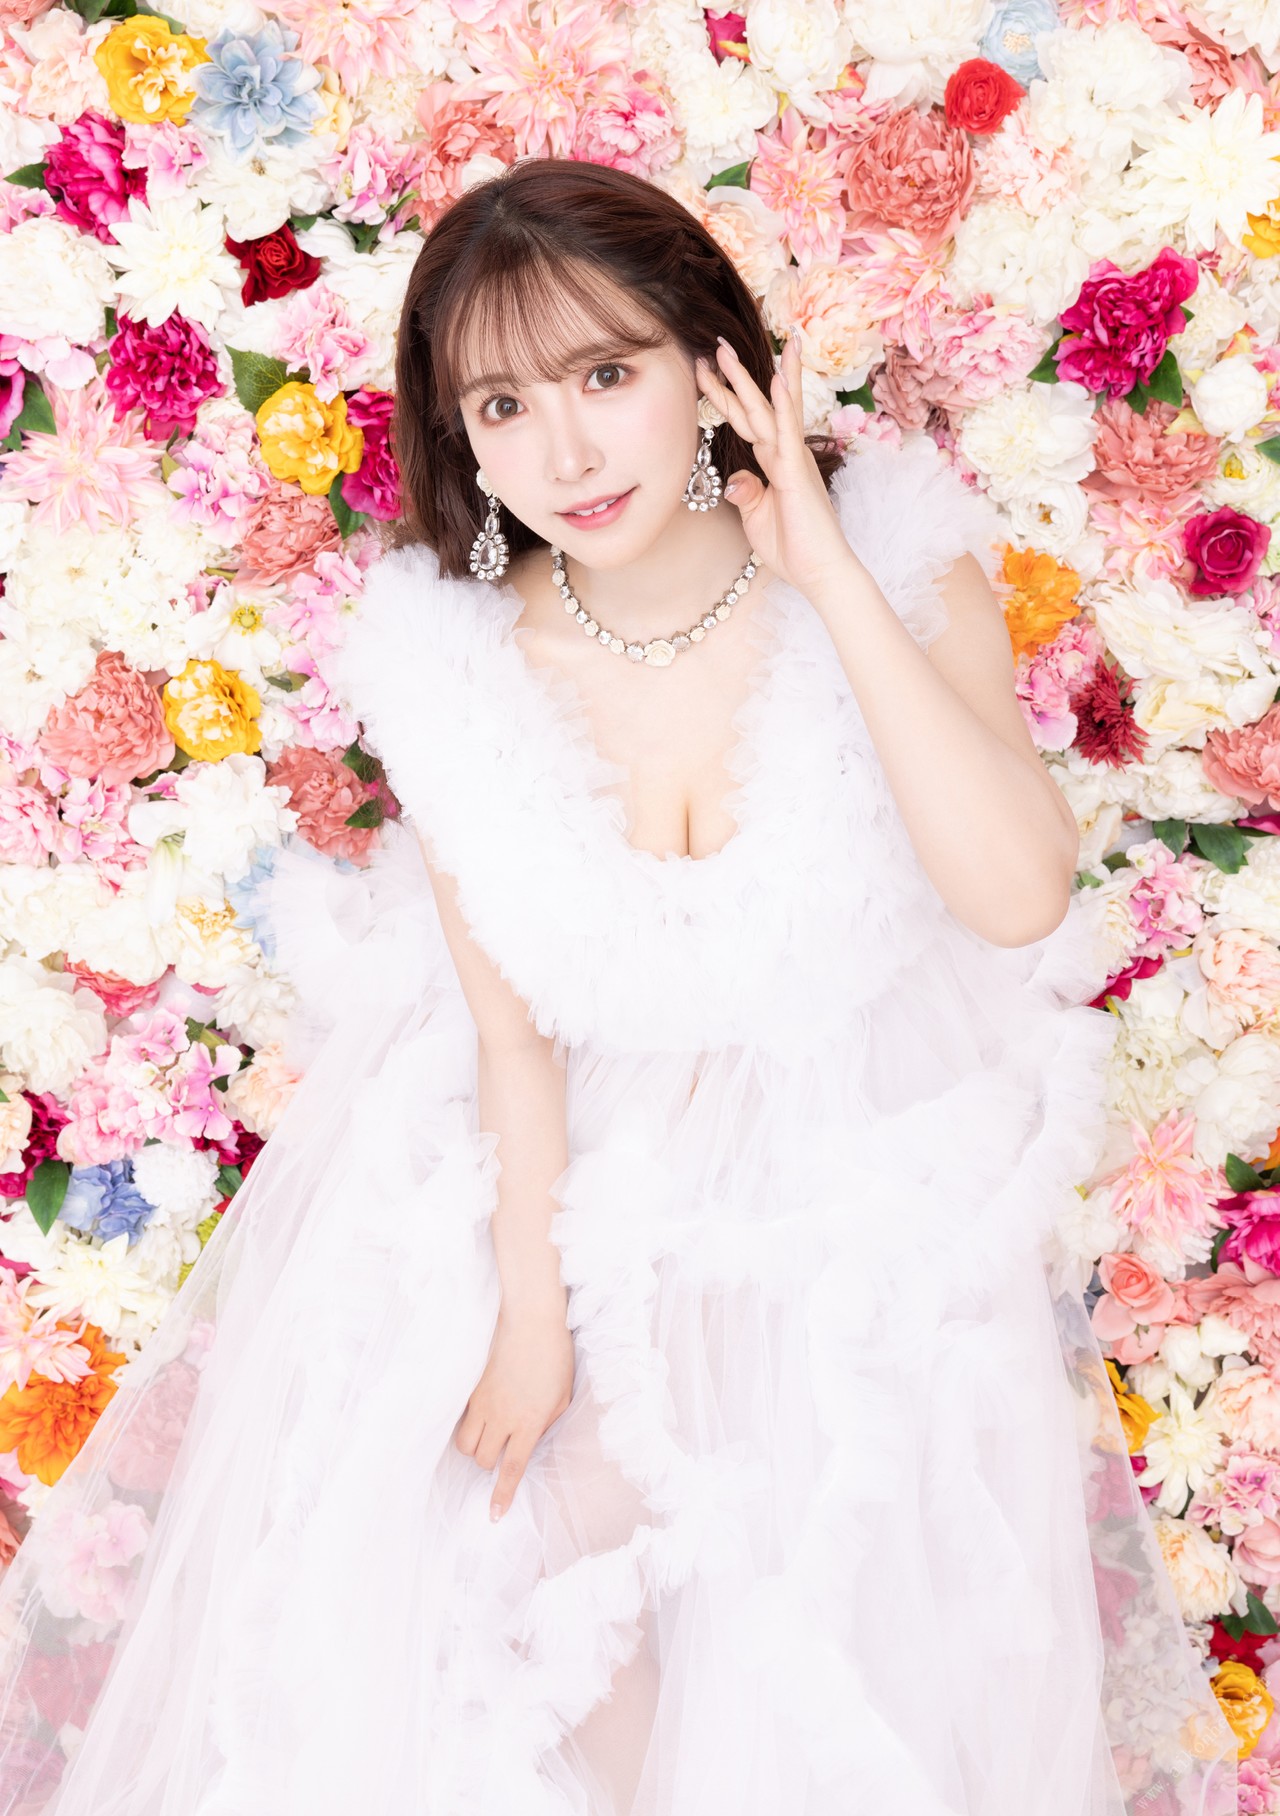 Yua Mikami 三上悠亜, 直筆サイン入りの 「Thank you for everything Mikami Yua Special photo book」 Set.02